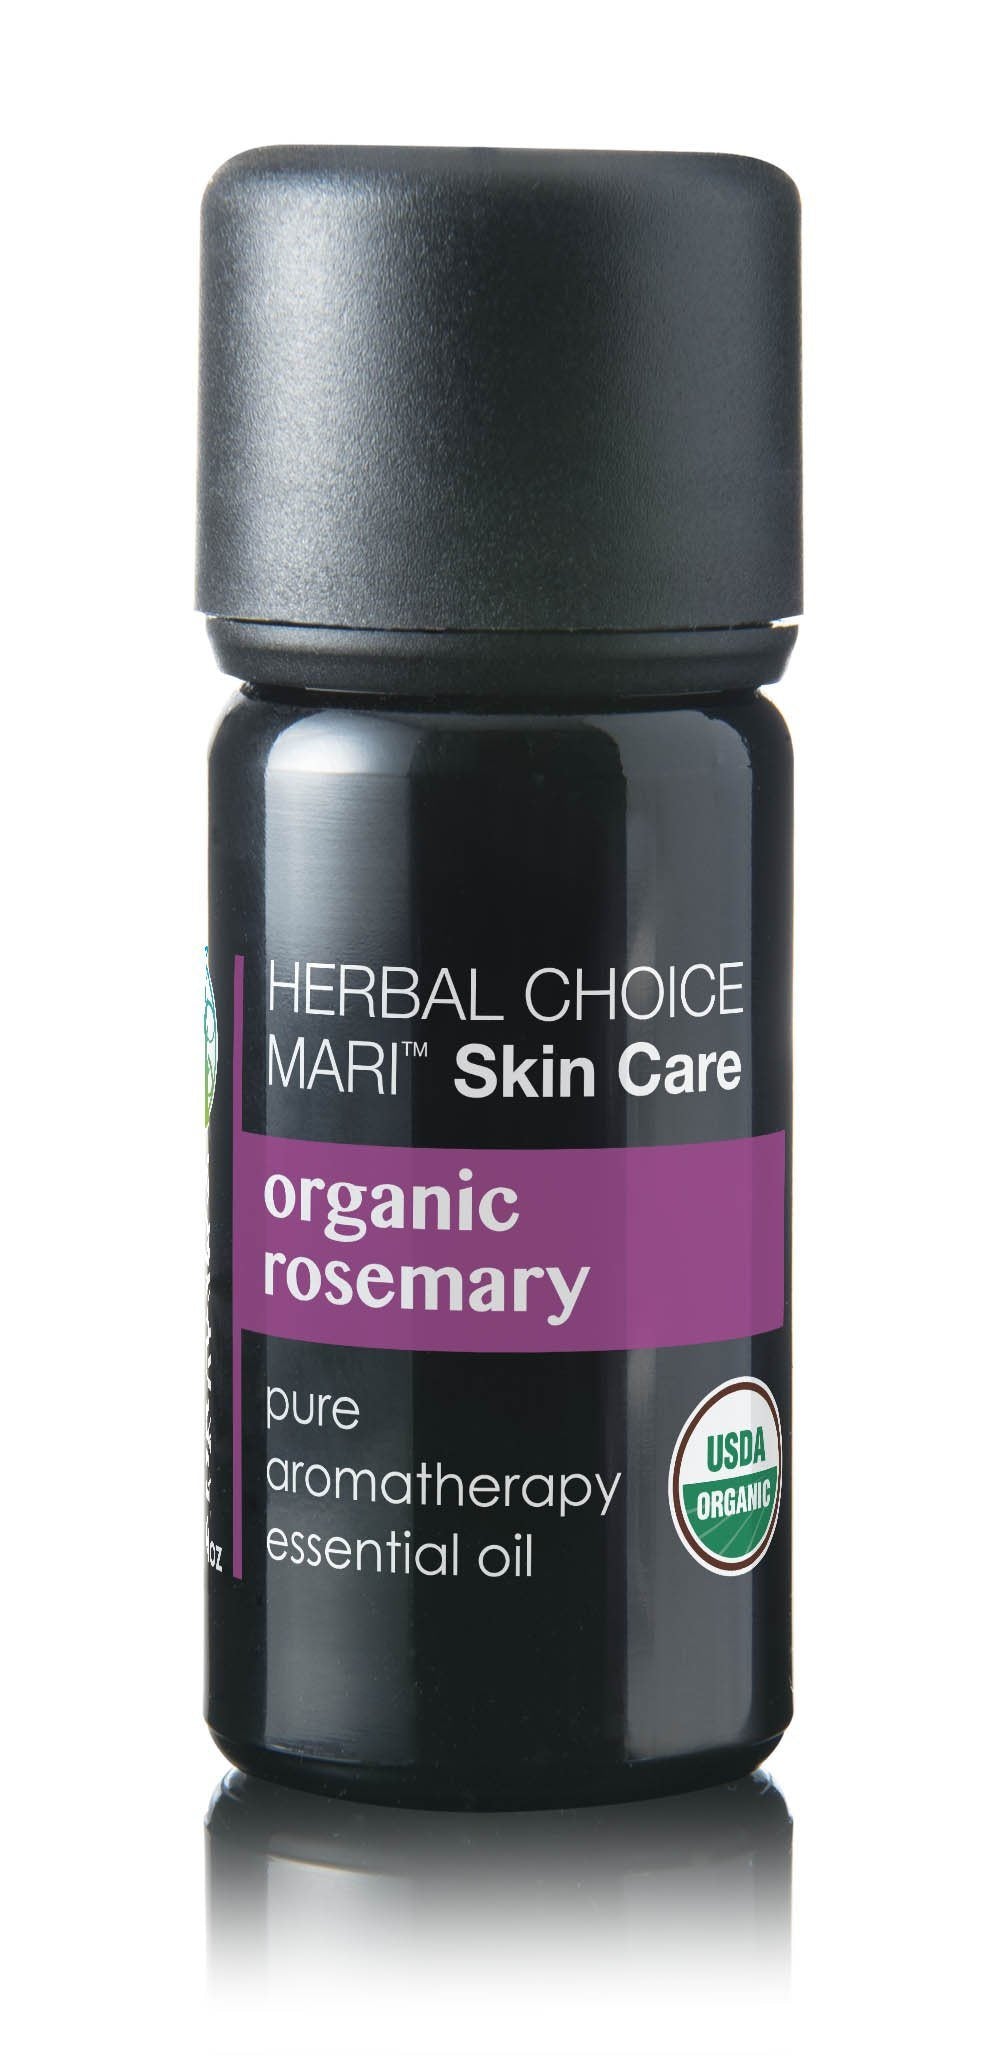 Rosemary Essential Oil – Nature's Cure-All